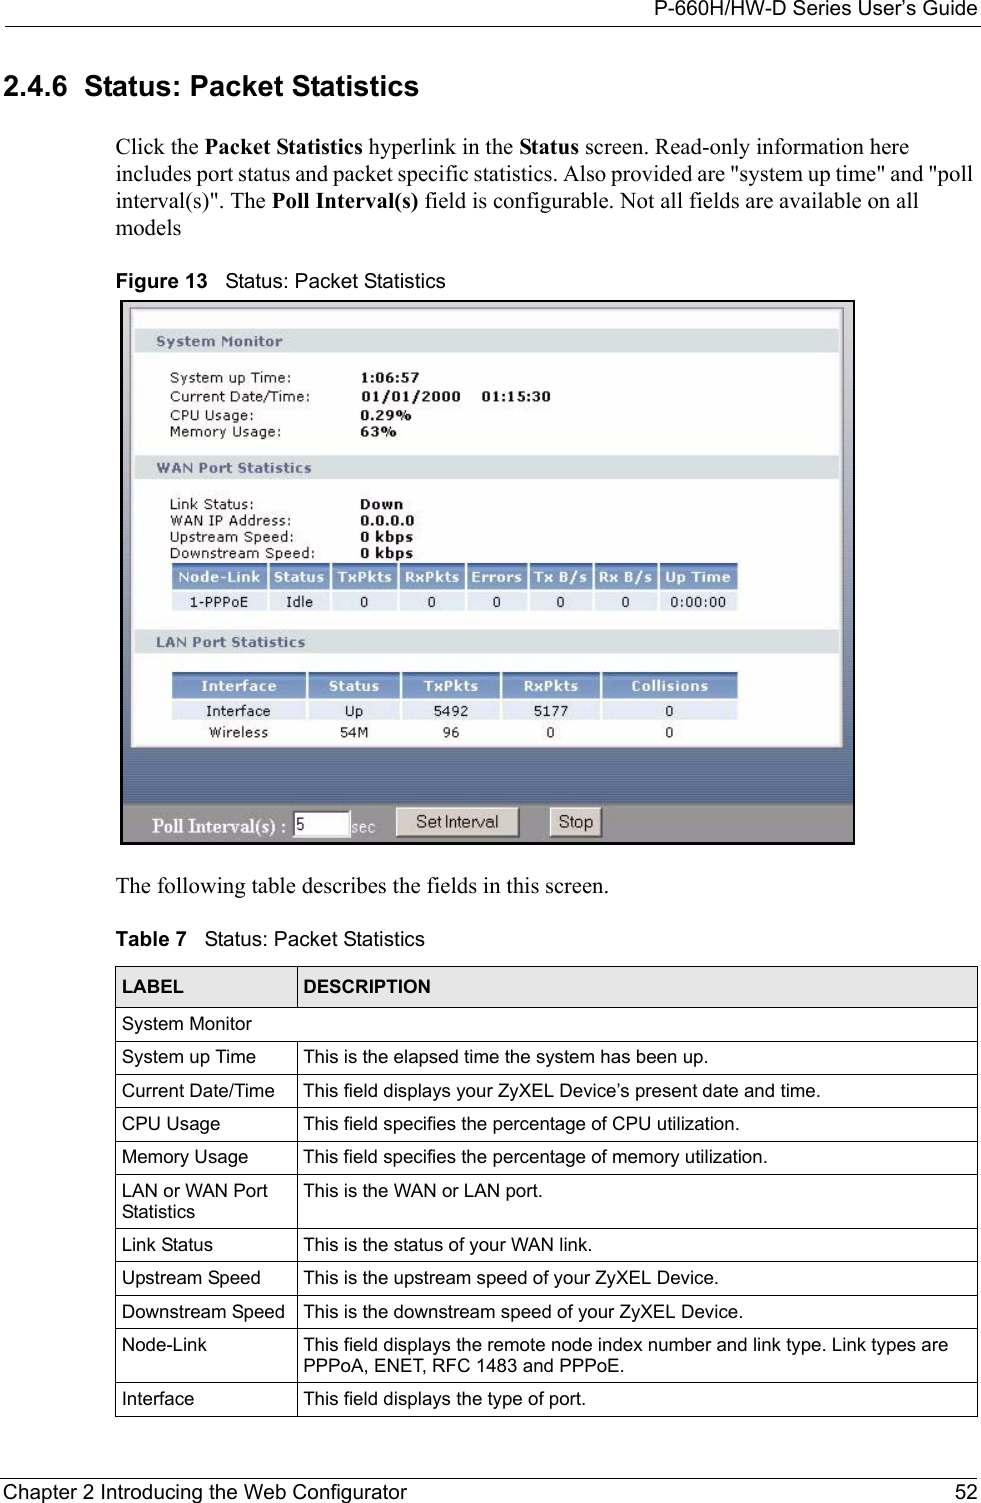 P-660H/HW-D Series User’s GuideChapter 2 Introducing the Web Configurator 522.4.6  Status: Packet StatisticsClick the Packet Statistics hyperlink in the Status screen. Read-only information here includes port status and packet specific statistics. Also provided are &quot;system up time&quot; and &quot;poll interval(s)&quot;. The Poll Interval(s) field is configurable. Not all fields are available on all modelsFigure 13   Status: Packet StatisticsThe following table describes the fields in this screen.  Table 7   Status: Packet StatisticsLABEL DESCRIPTIONSystem MonitorSystem up Time This is the elapsed time the system has been up.Current Date/Time This field displays your ZyXEL Device’s present date and time.CPU Usage This field specifies the percentage of CPU utilization.Memory Usage This field specifies the percentage of memory utilization. LAN or WAN Port StatisticsThis is the WAN or LAN port.Link Status This is the status of your WAN link.Upstream Speed This is the upstream speed of your ZyXEL Device.Downstream Speed  This is the downstream speed of your ZyXEL Device.Node-Link This field displays the remote node index number and link type. Link types are PPPoA, ENET, RFC 1483 and PPPoE.Interface This field displays the type of port.